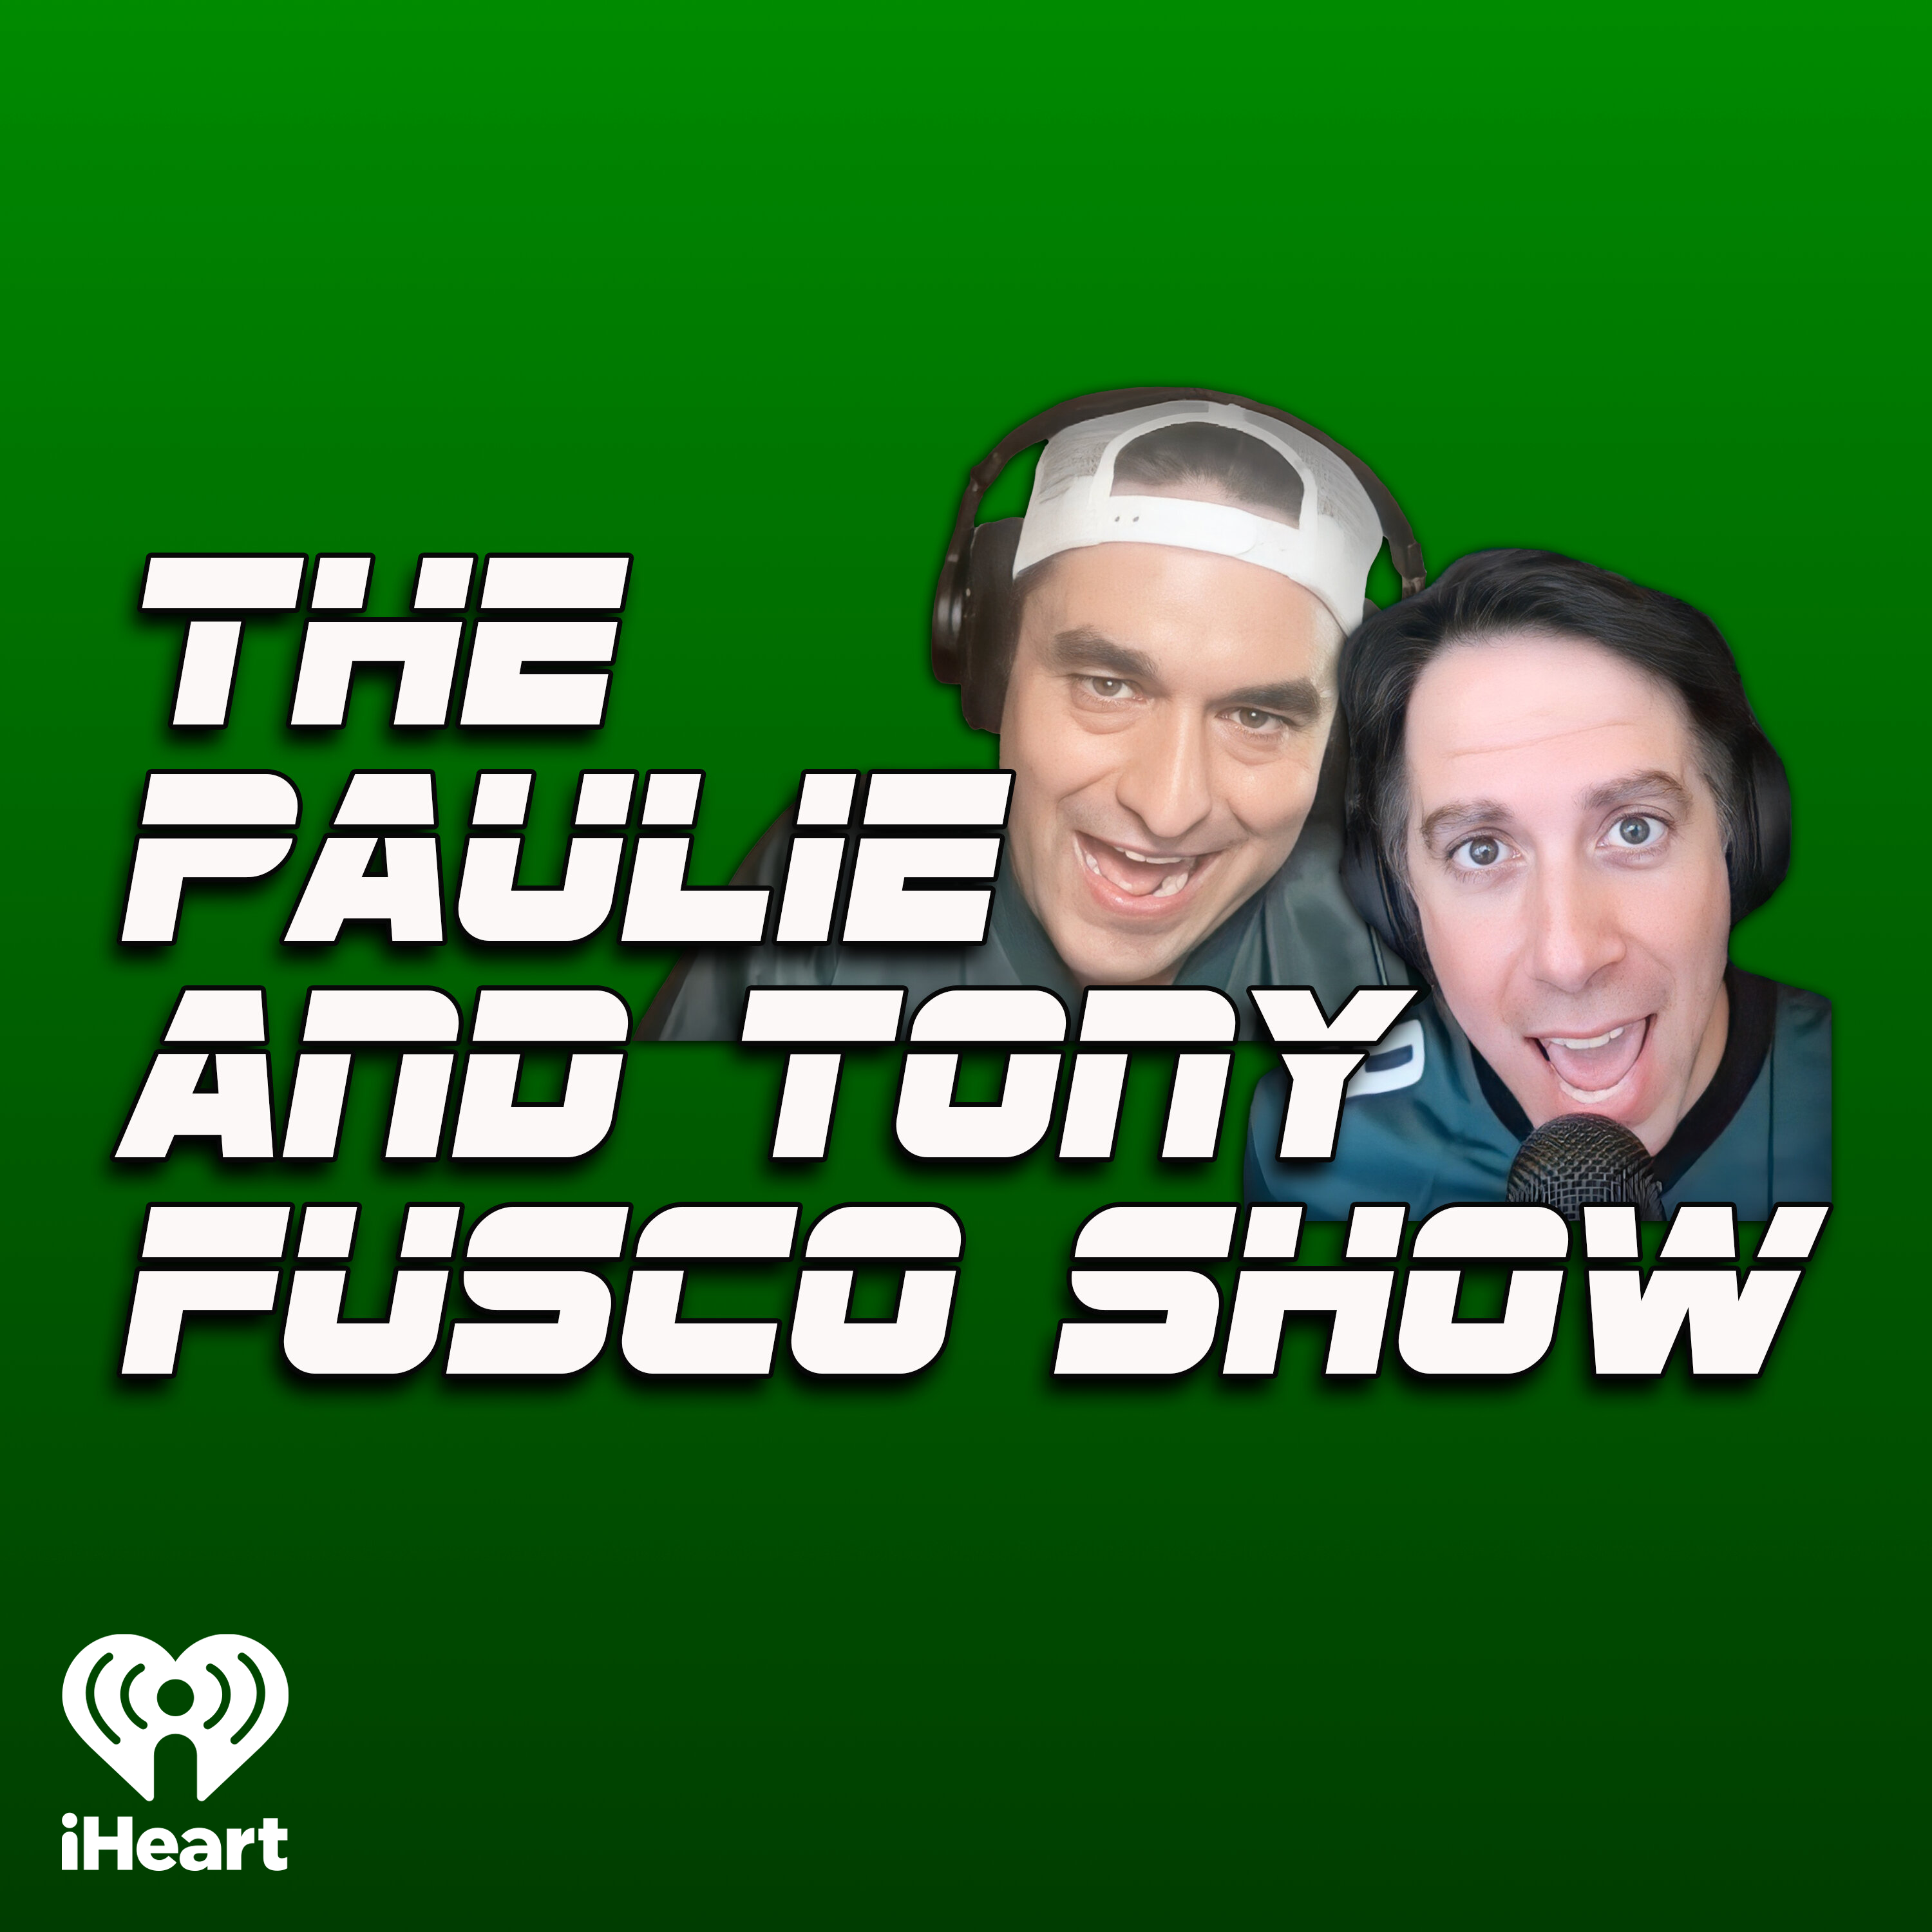 The Paulie & Tony Fusco Show: Rob Parker gets KICKED OFF for bad takes on Trey Lance trade, shocking NFL cuts